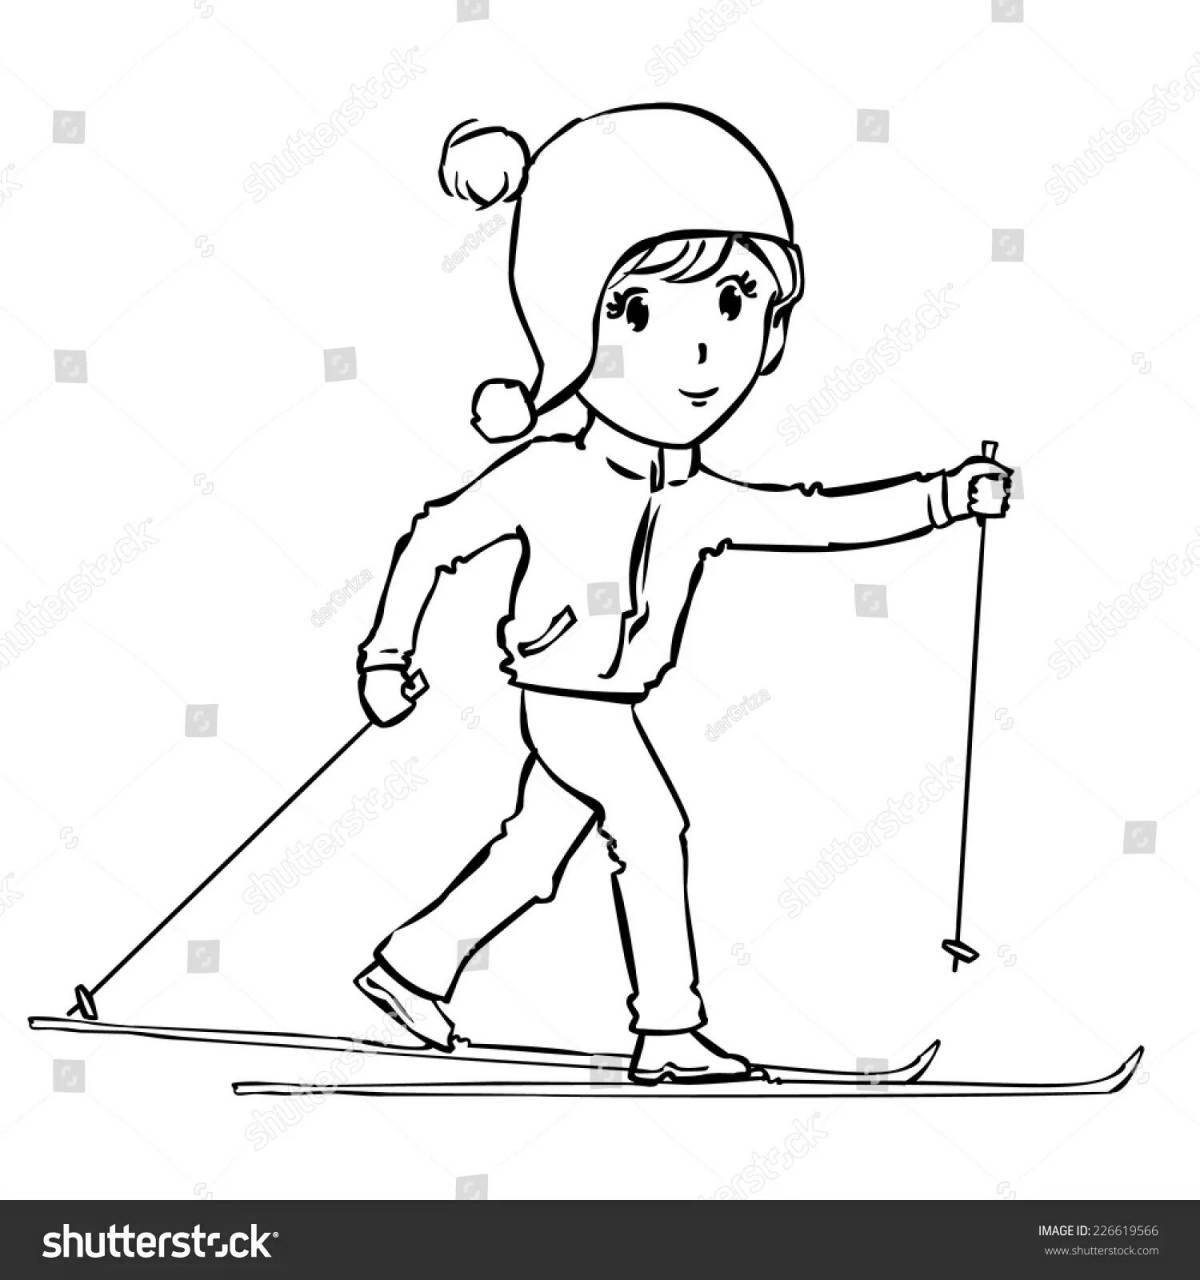 Sport skier on the move